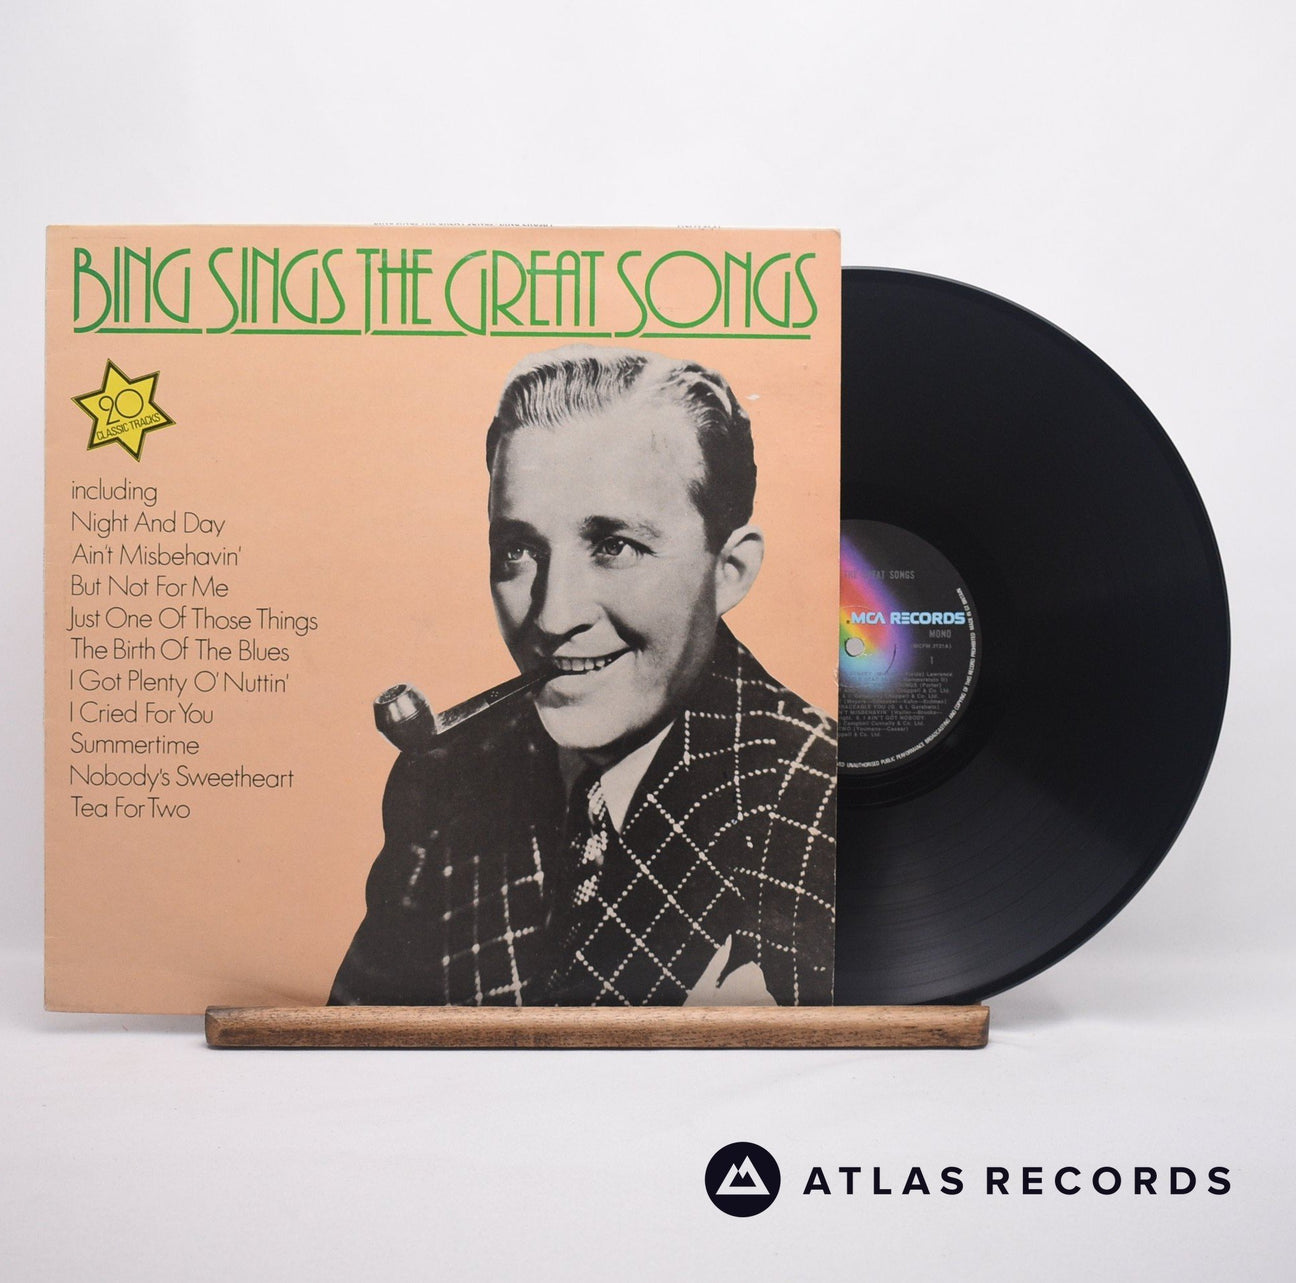 Bing Crosby Bing Sings The Great Songs LP Vinyl Record - Front Cover & Record